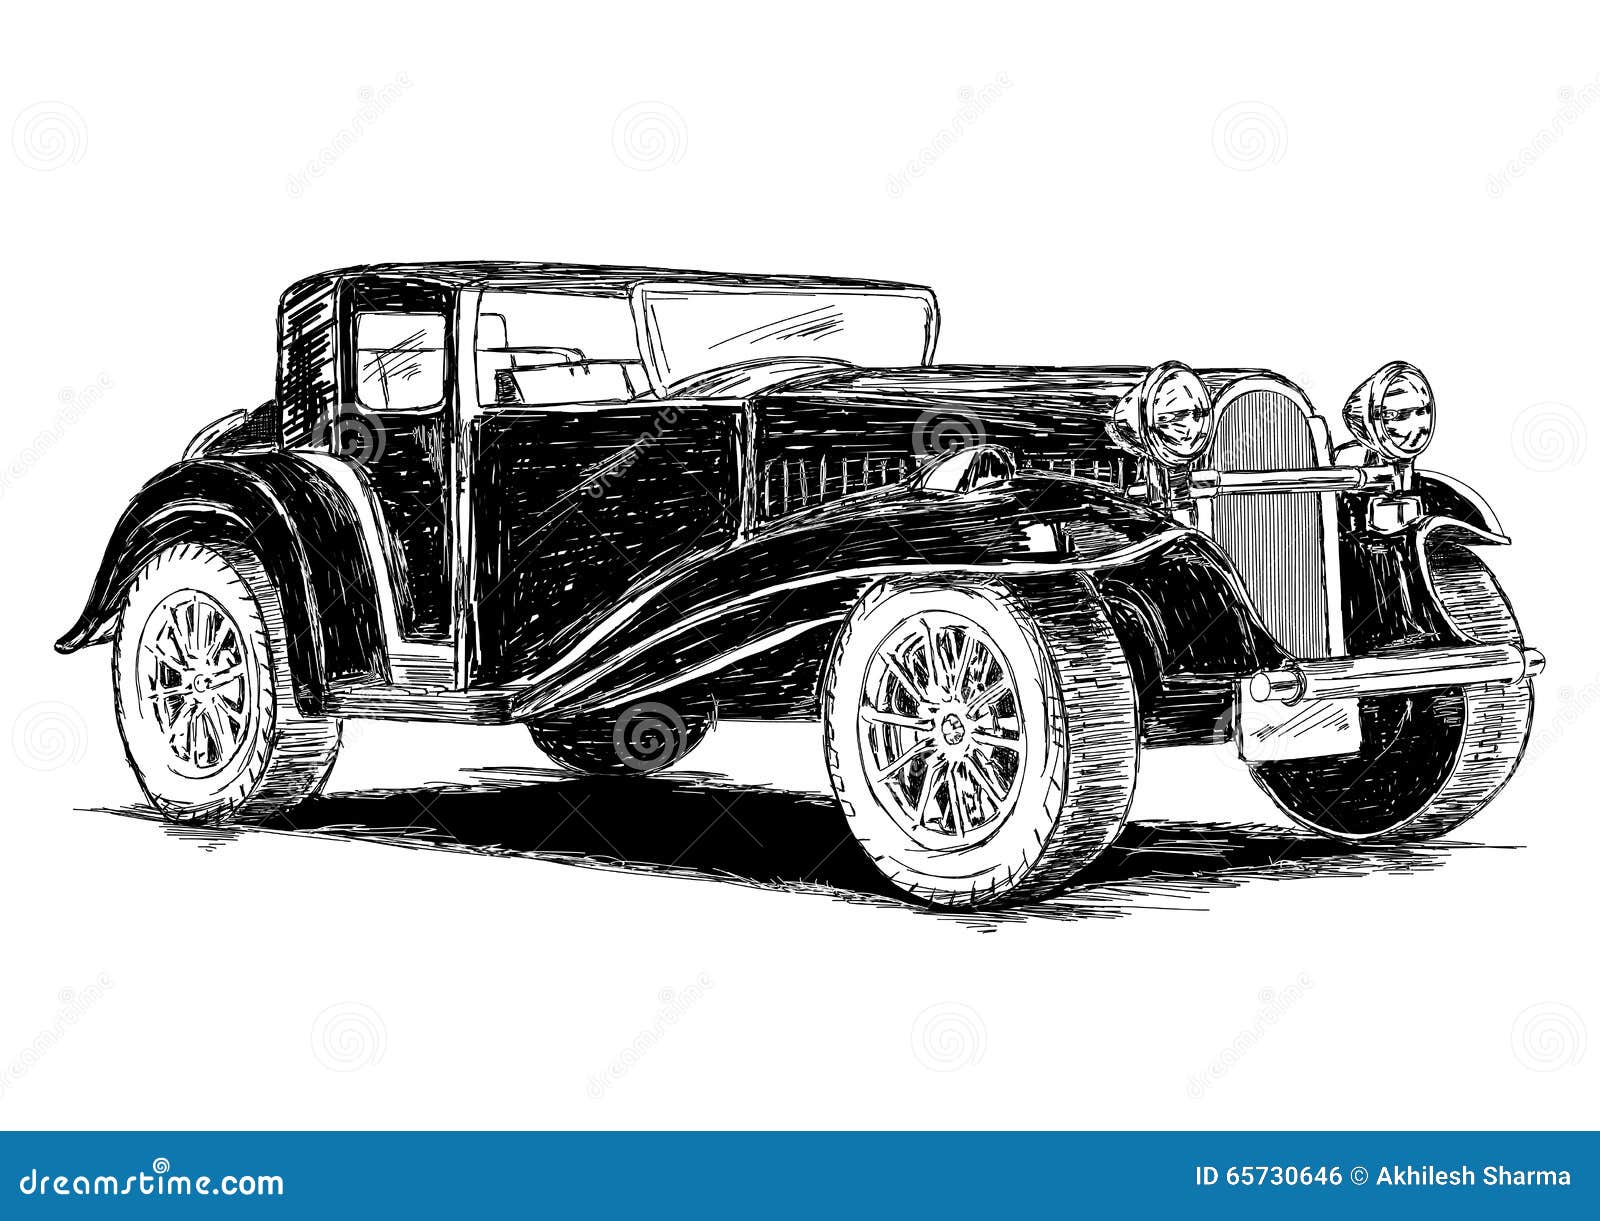 Incredible Antique car updated to modern age clipart with Best Inspiration